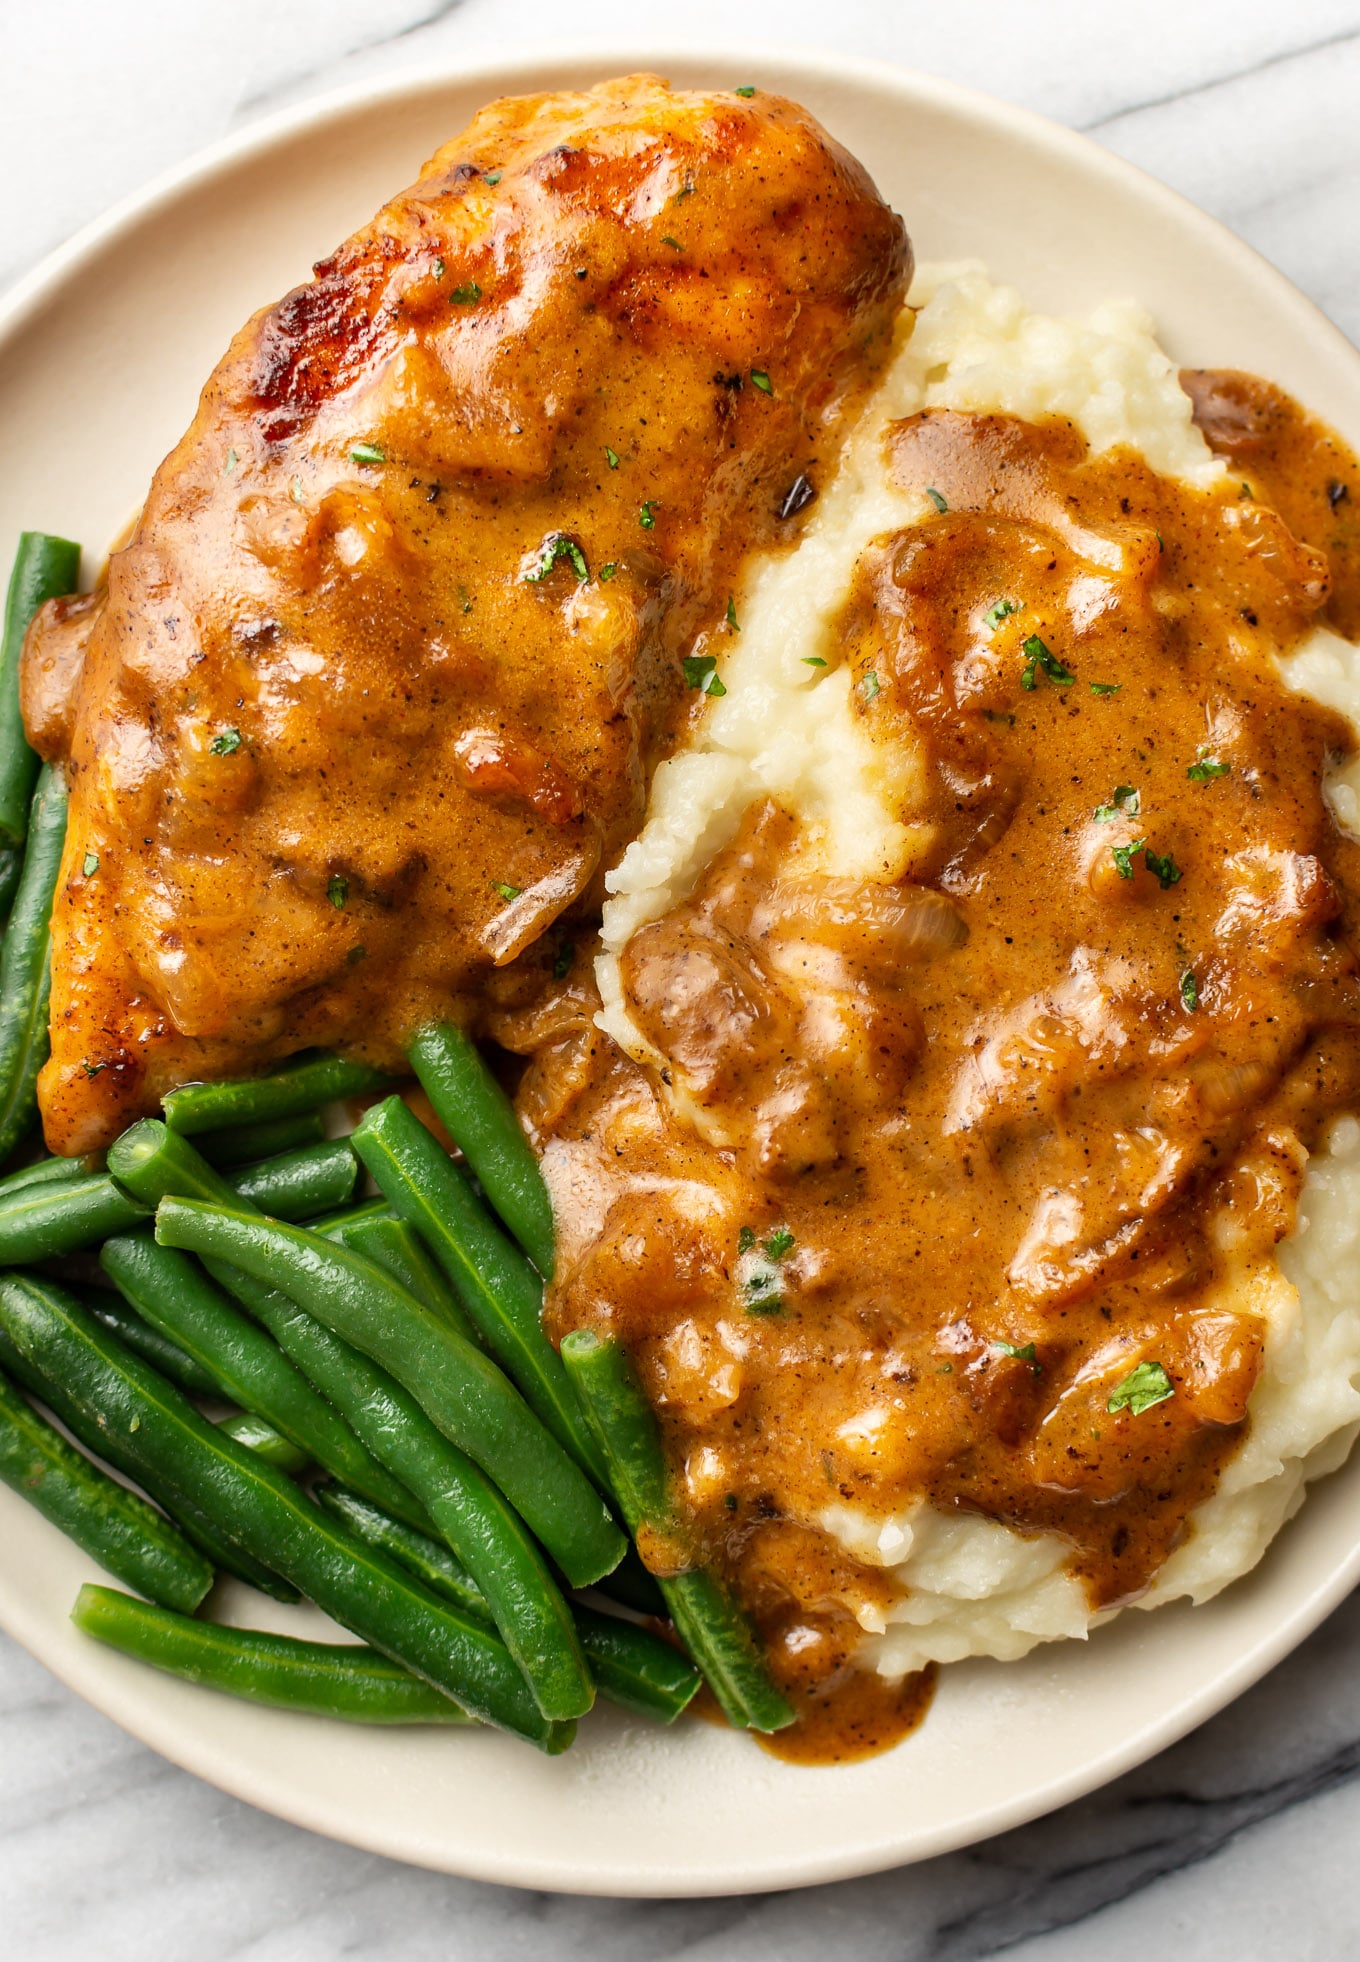 Get Cozy With 6 of Our Best Smothered Southern Comfort Recipes